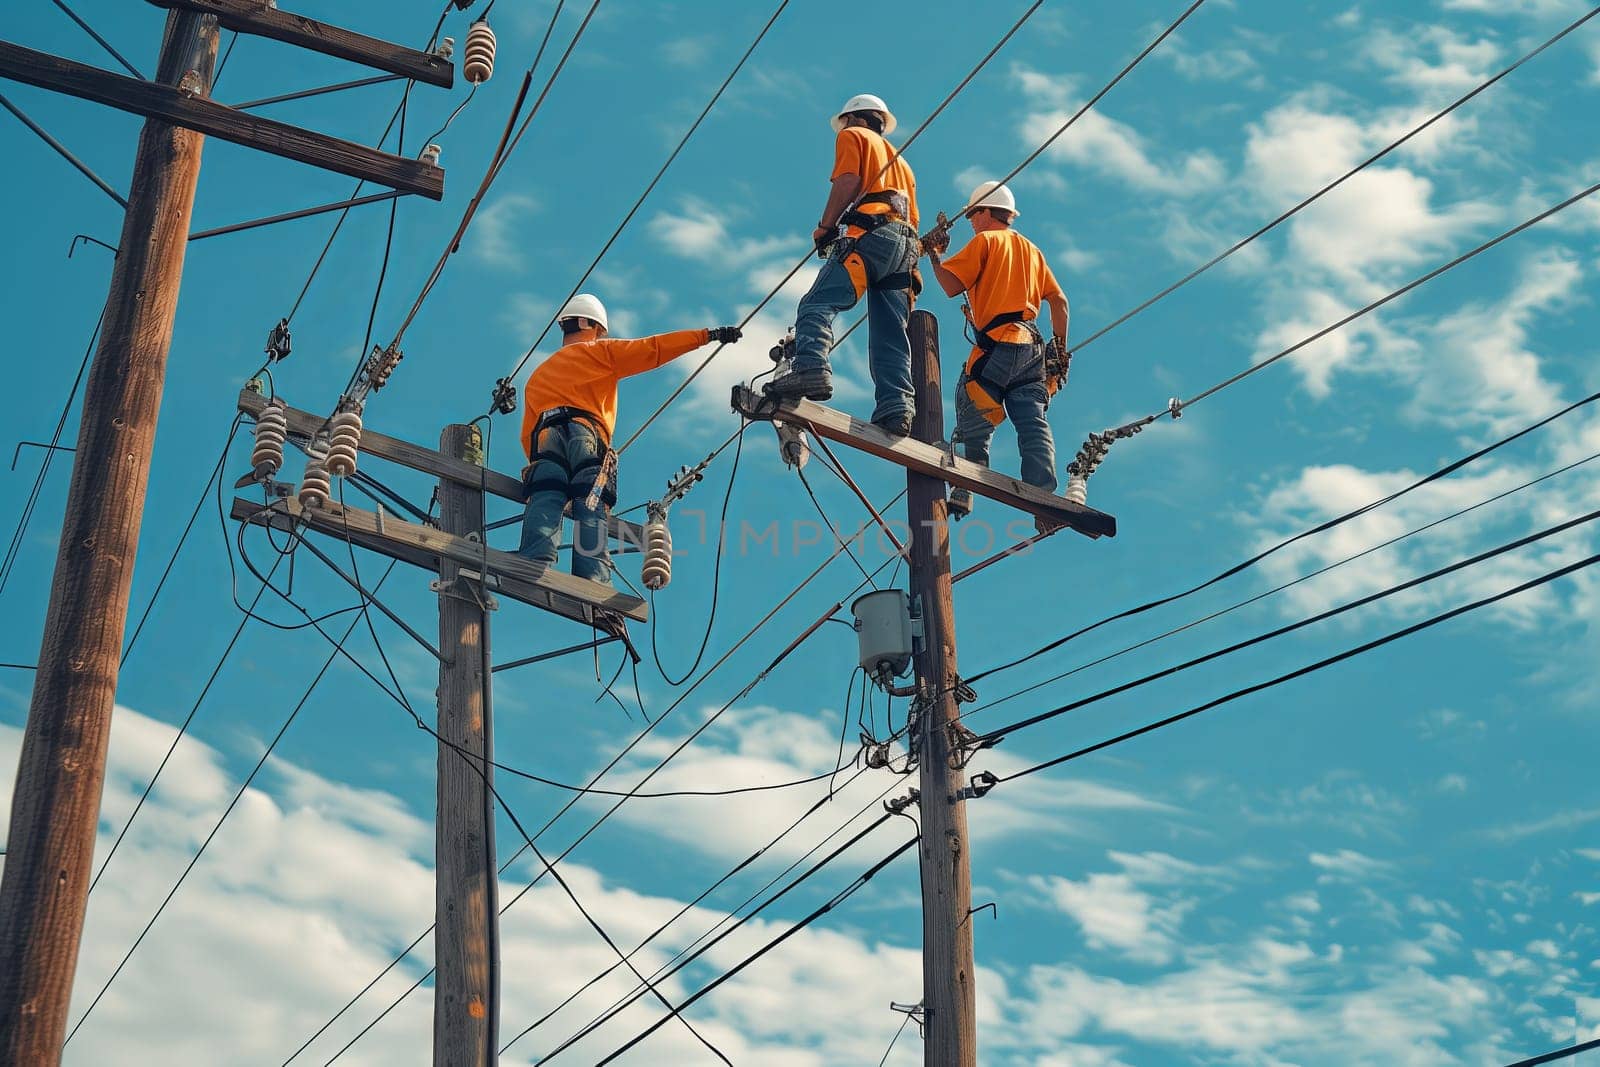 Three men in helmets are standing on overhead power lines, against an electric blue sky. They are working to ensure the electrical supply using a vehicle and poles